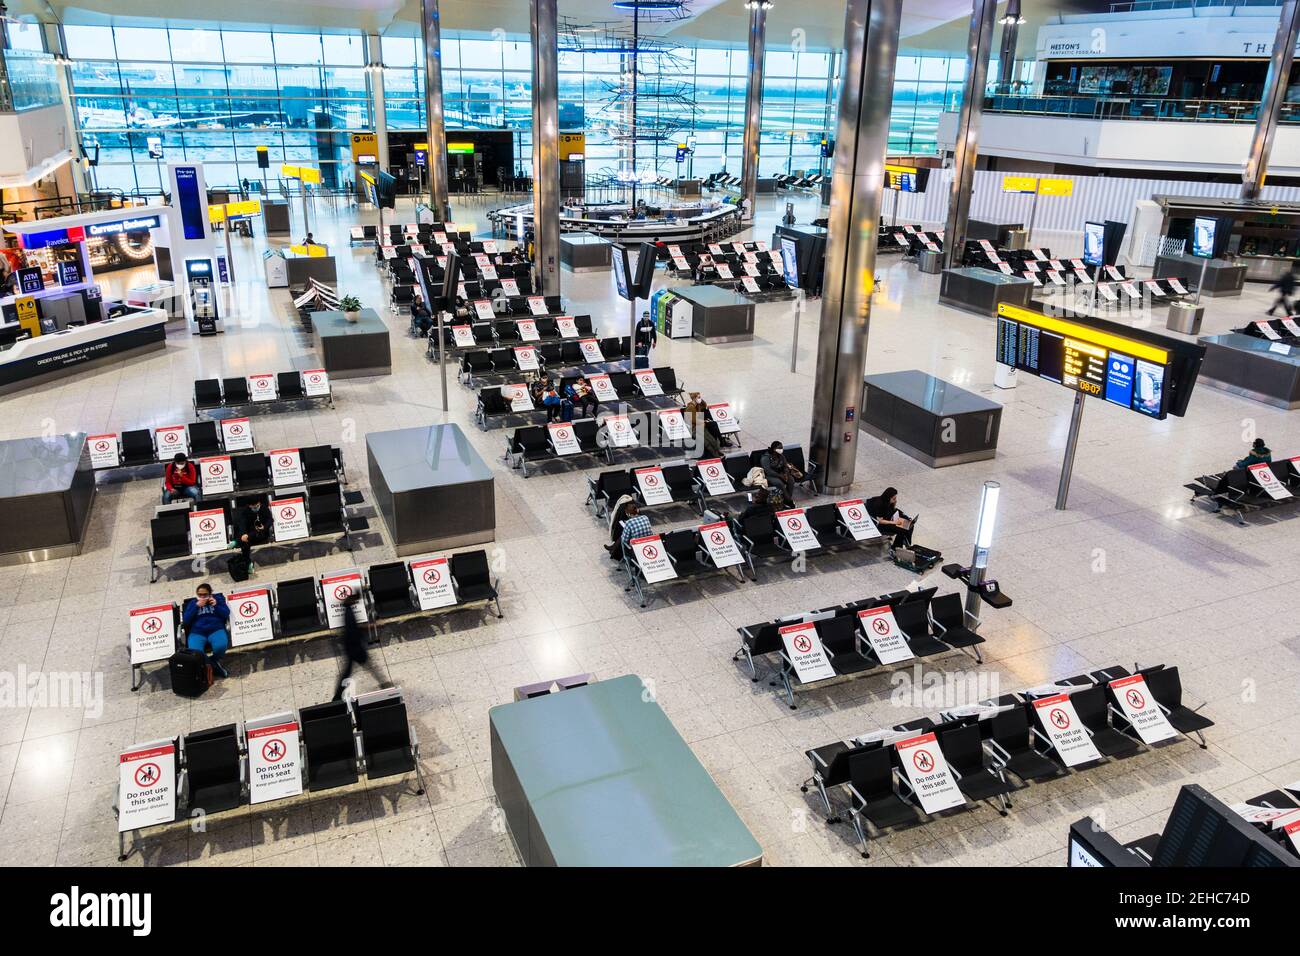 Pandemic air travel social distancing at London Heathrow airport terminal building seating area with placards placed on alternate seats Stock Photo